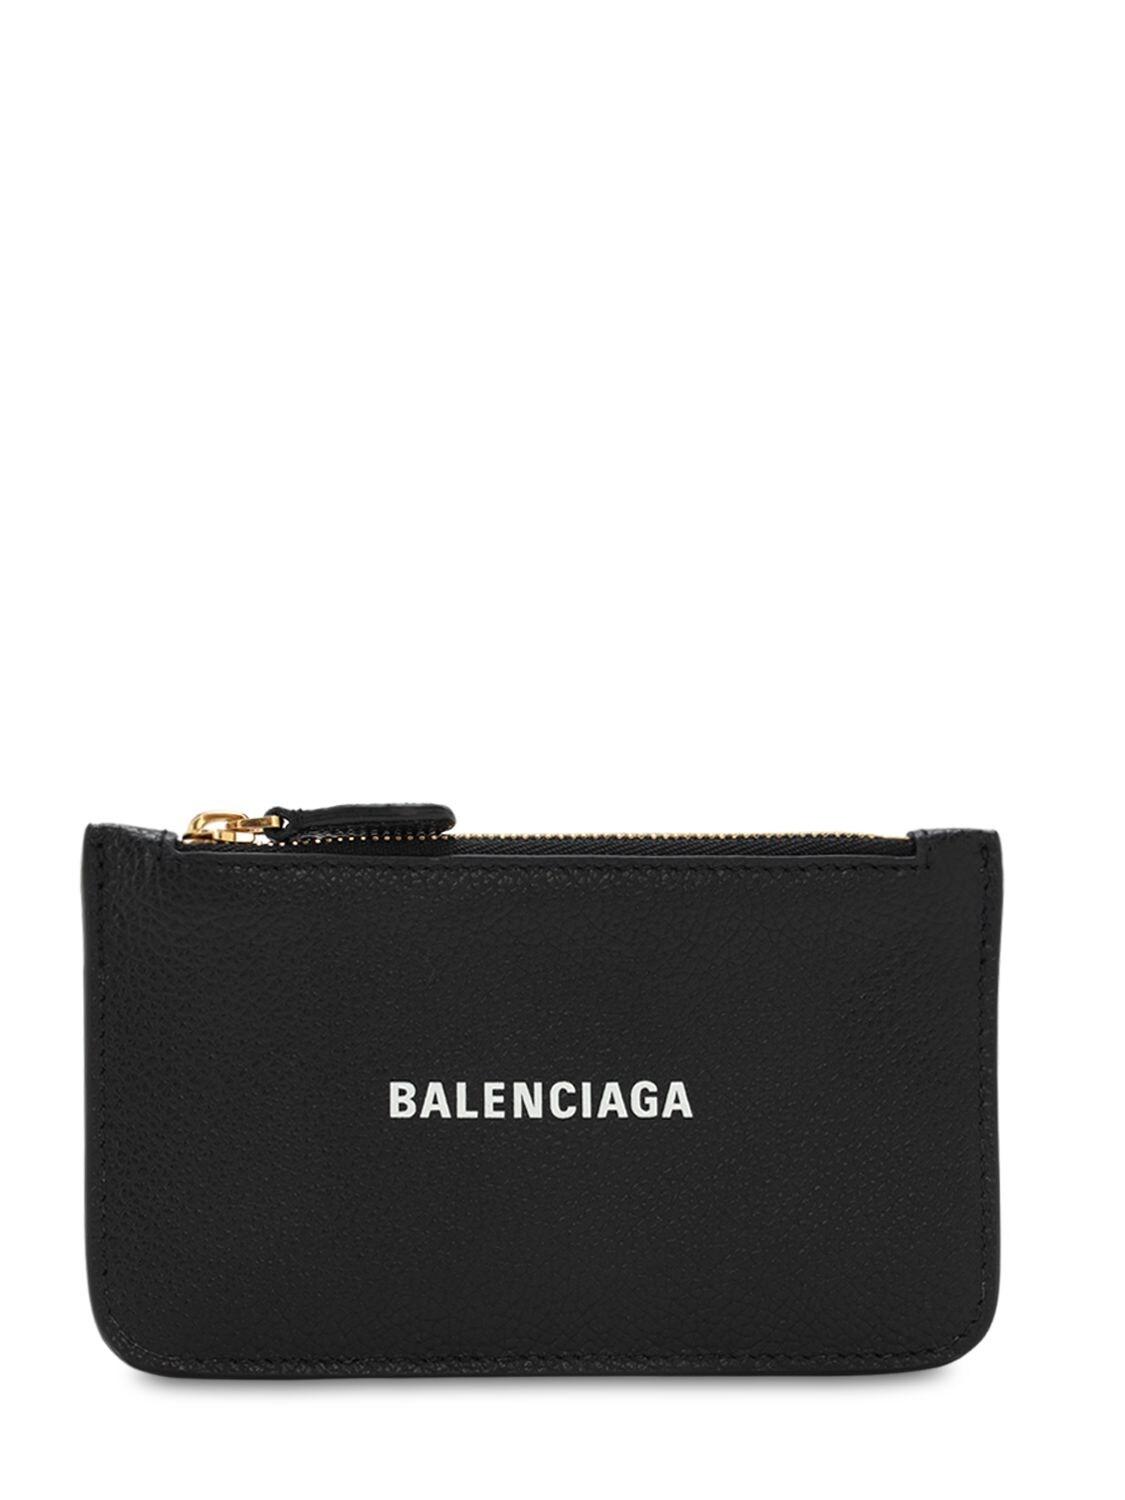 Balenciaga Grained Leather Zip Card Holder in Black - Lyst